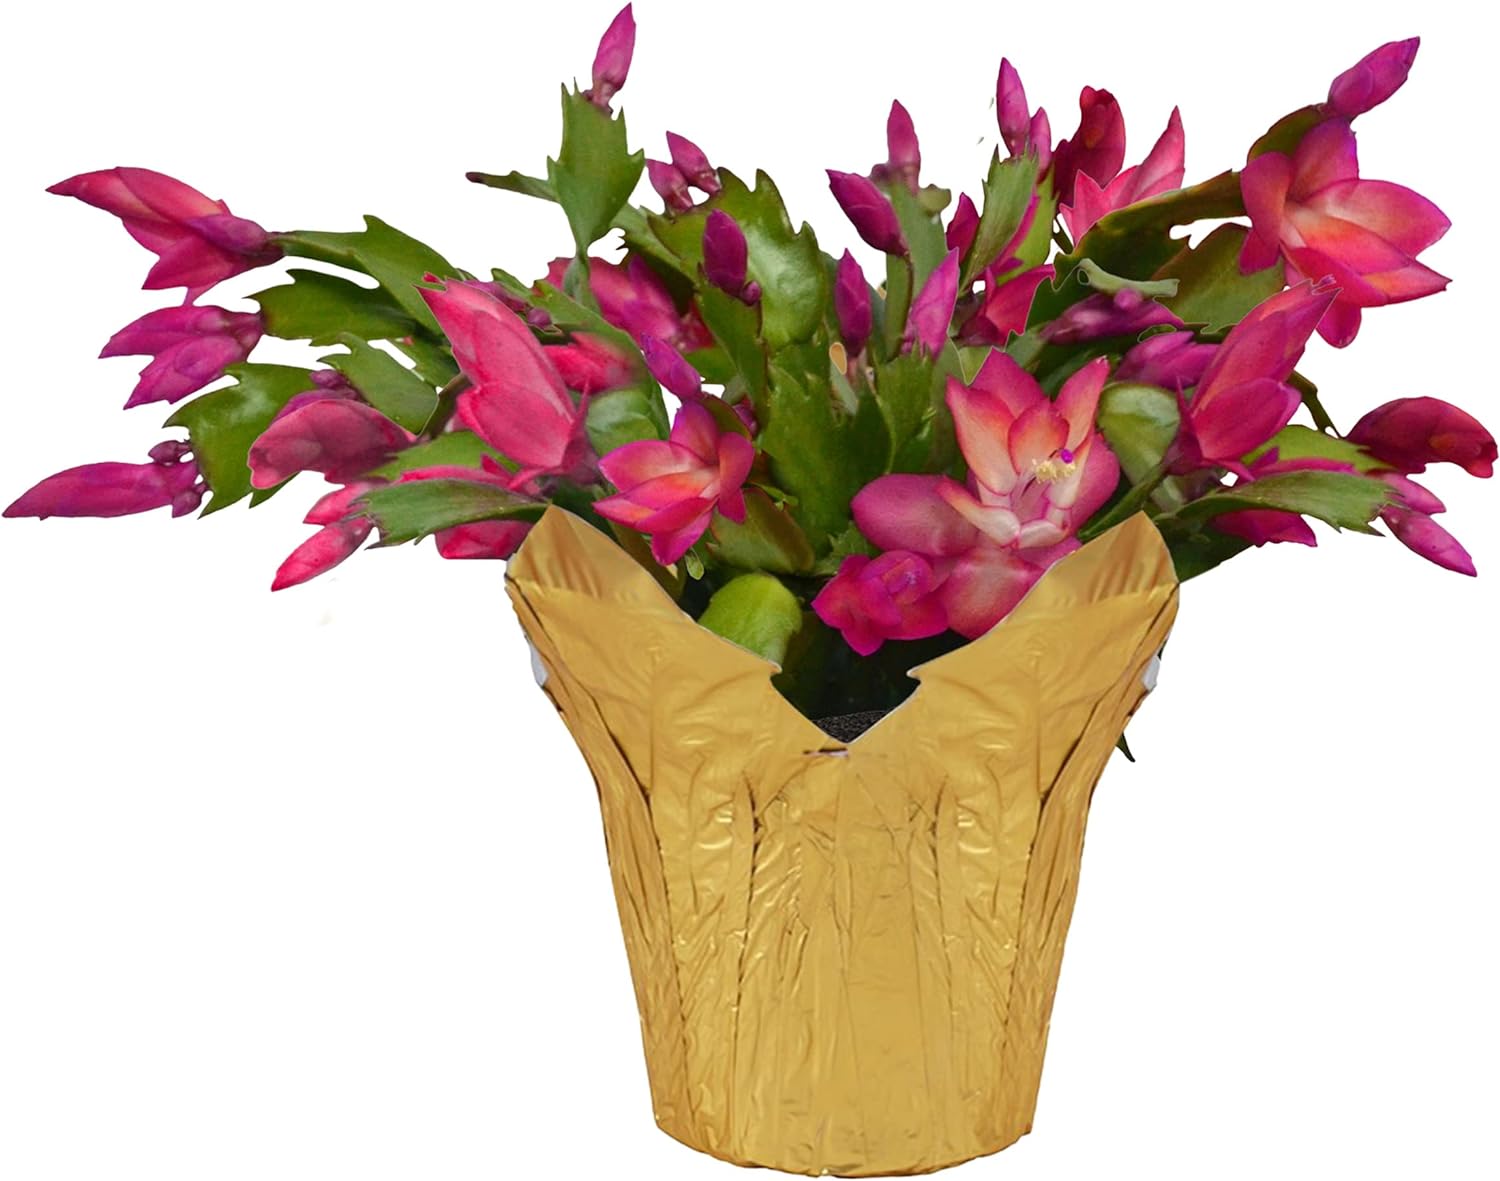 Live Flowering Thanksgiving/Christmas Cactus (Zygocactus) - Red - Beautiful Holiday Decor - 7 Tall by 7 Wide in 1.25 Qt Pot with Deco Cover